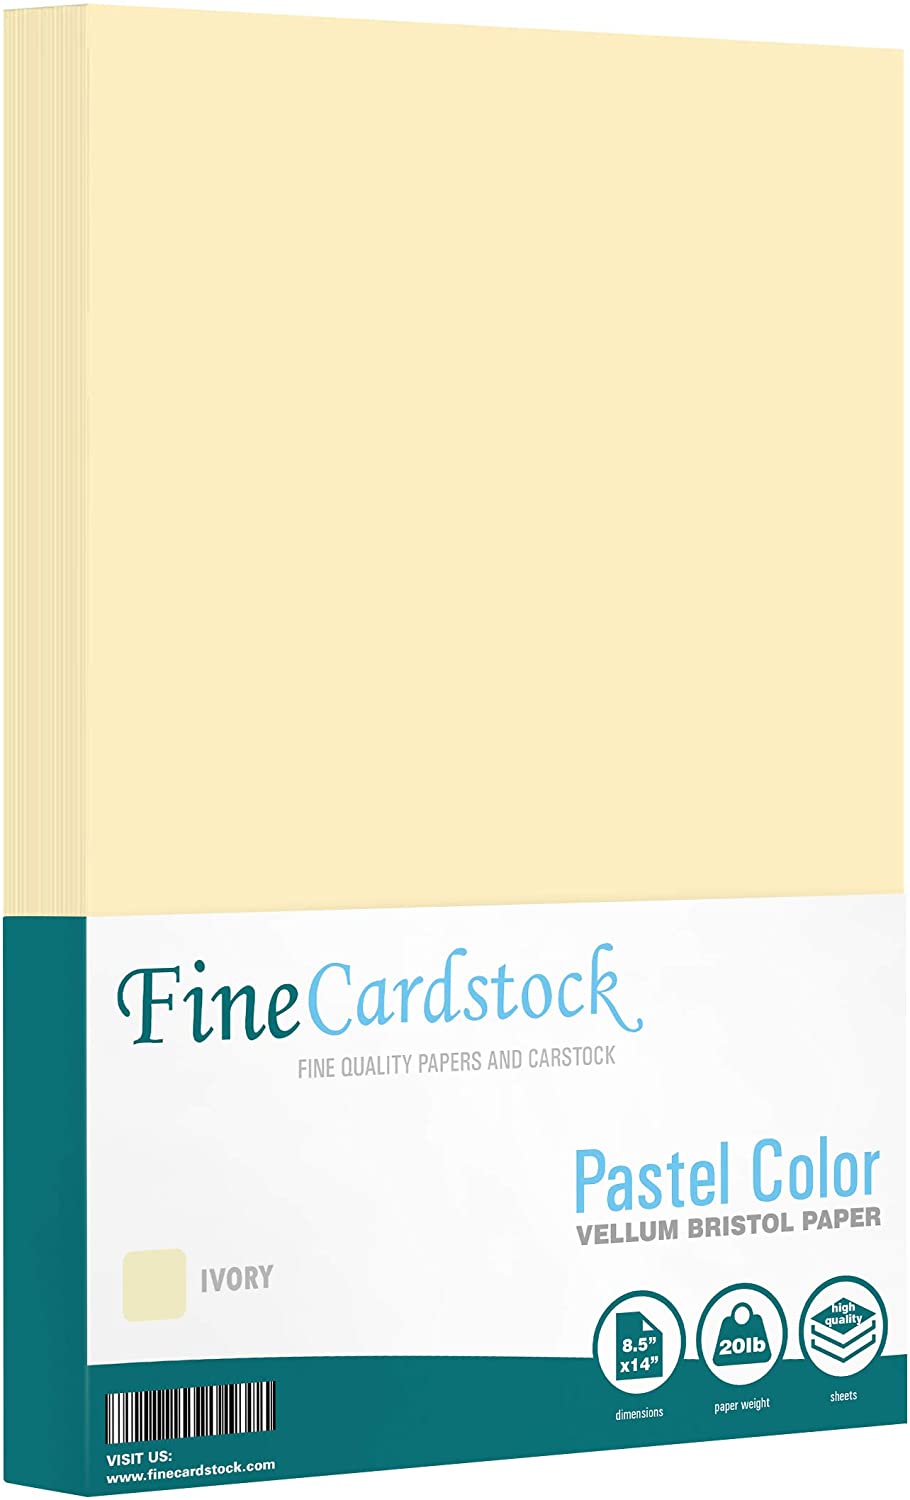 8.5 x 14” Pastel Color Paper – Great for Cards and Stationery Printing | Legal, Menu Size | Lightweight 20lb Paper | 100 Sheets | Ivory - image 1 of 6